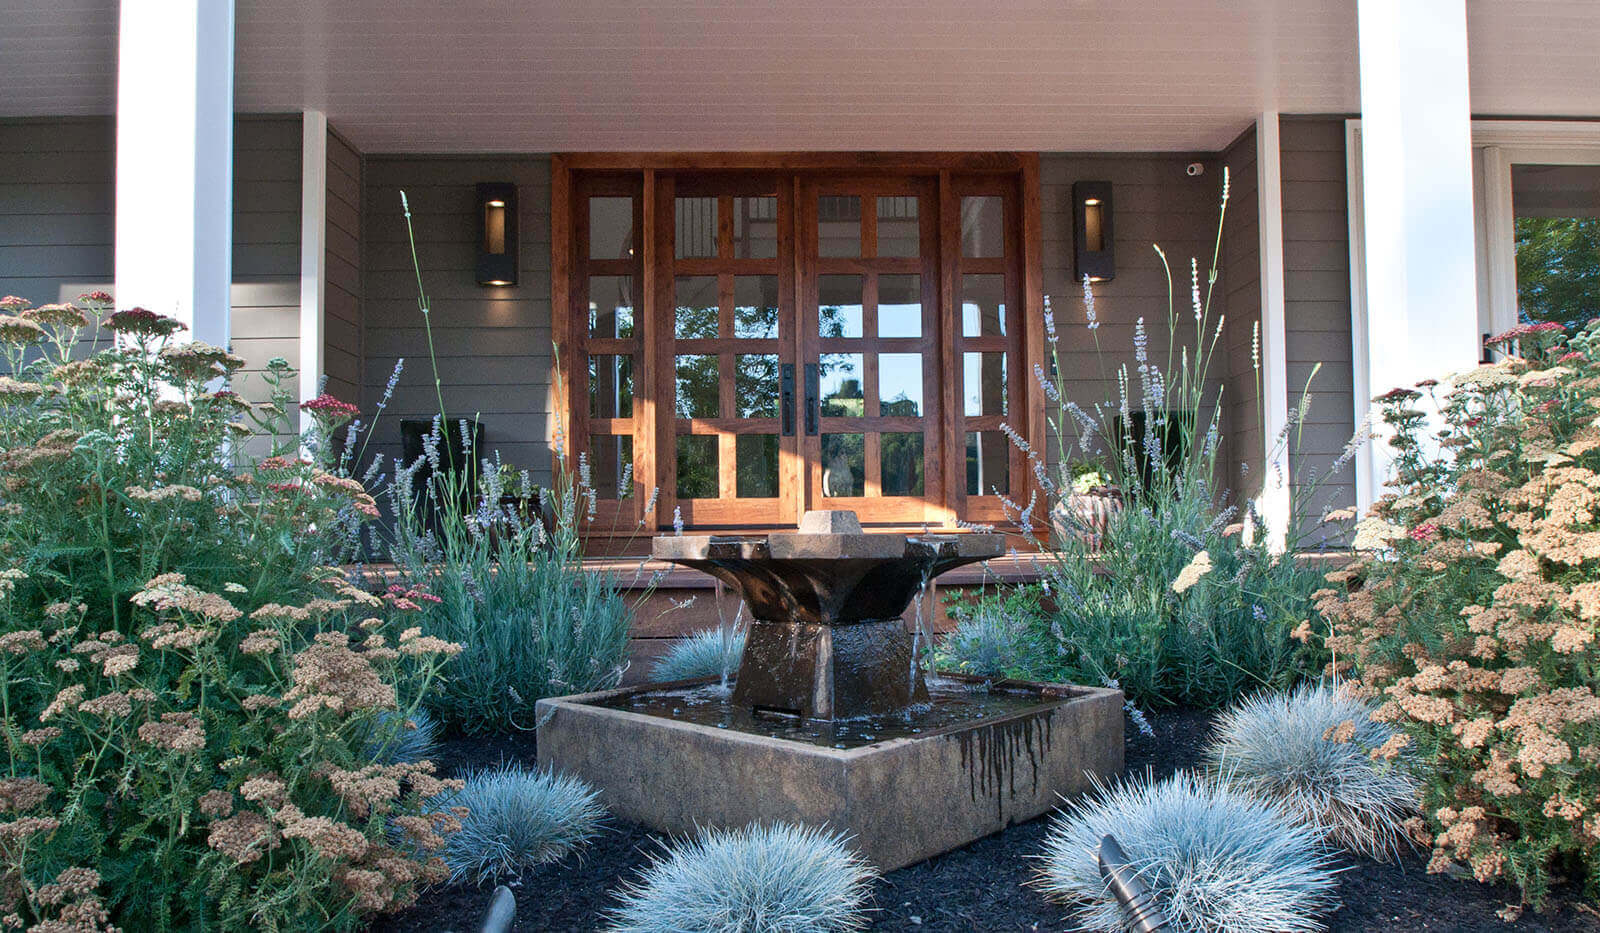 Centerpiece fountain with blue, green, and white grasses and flowers in front of glass ranch doors